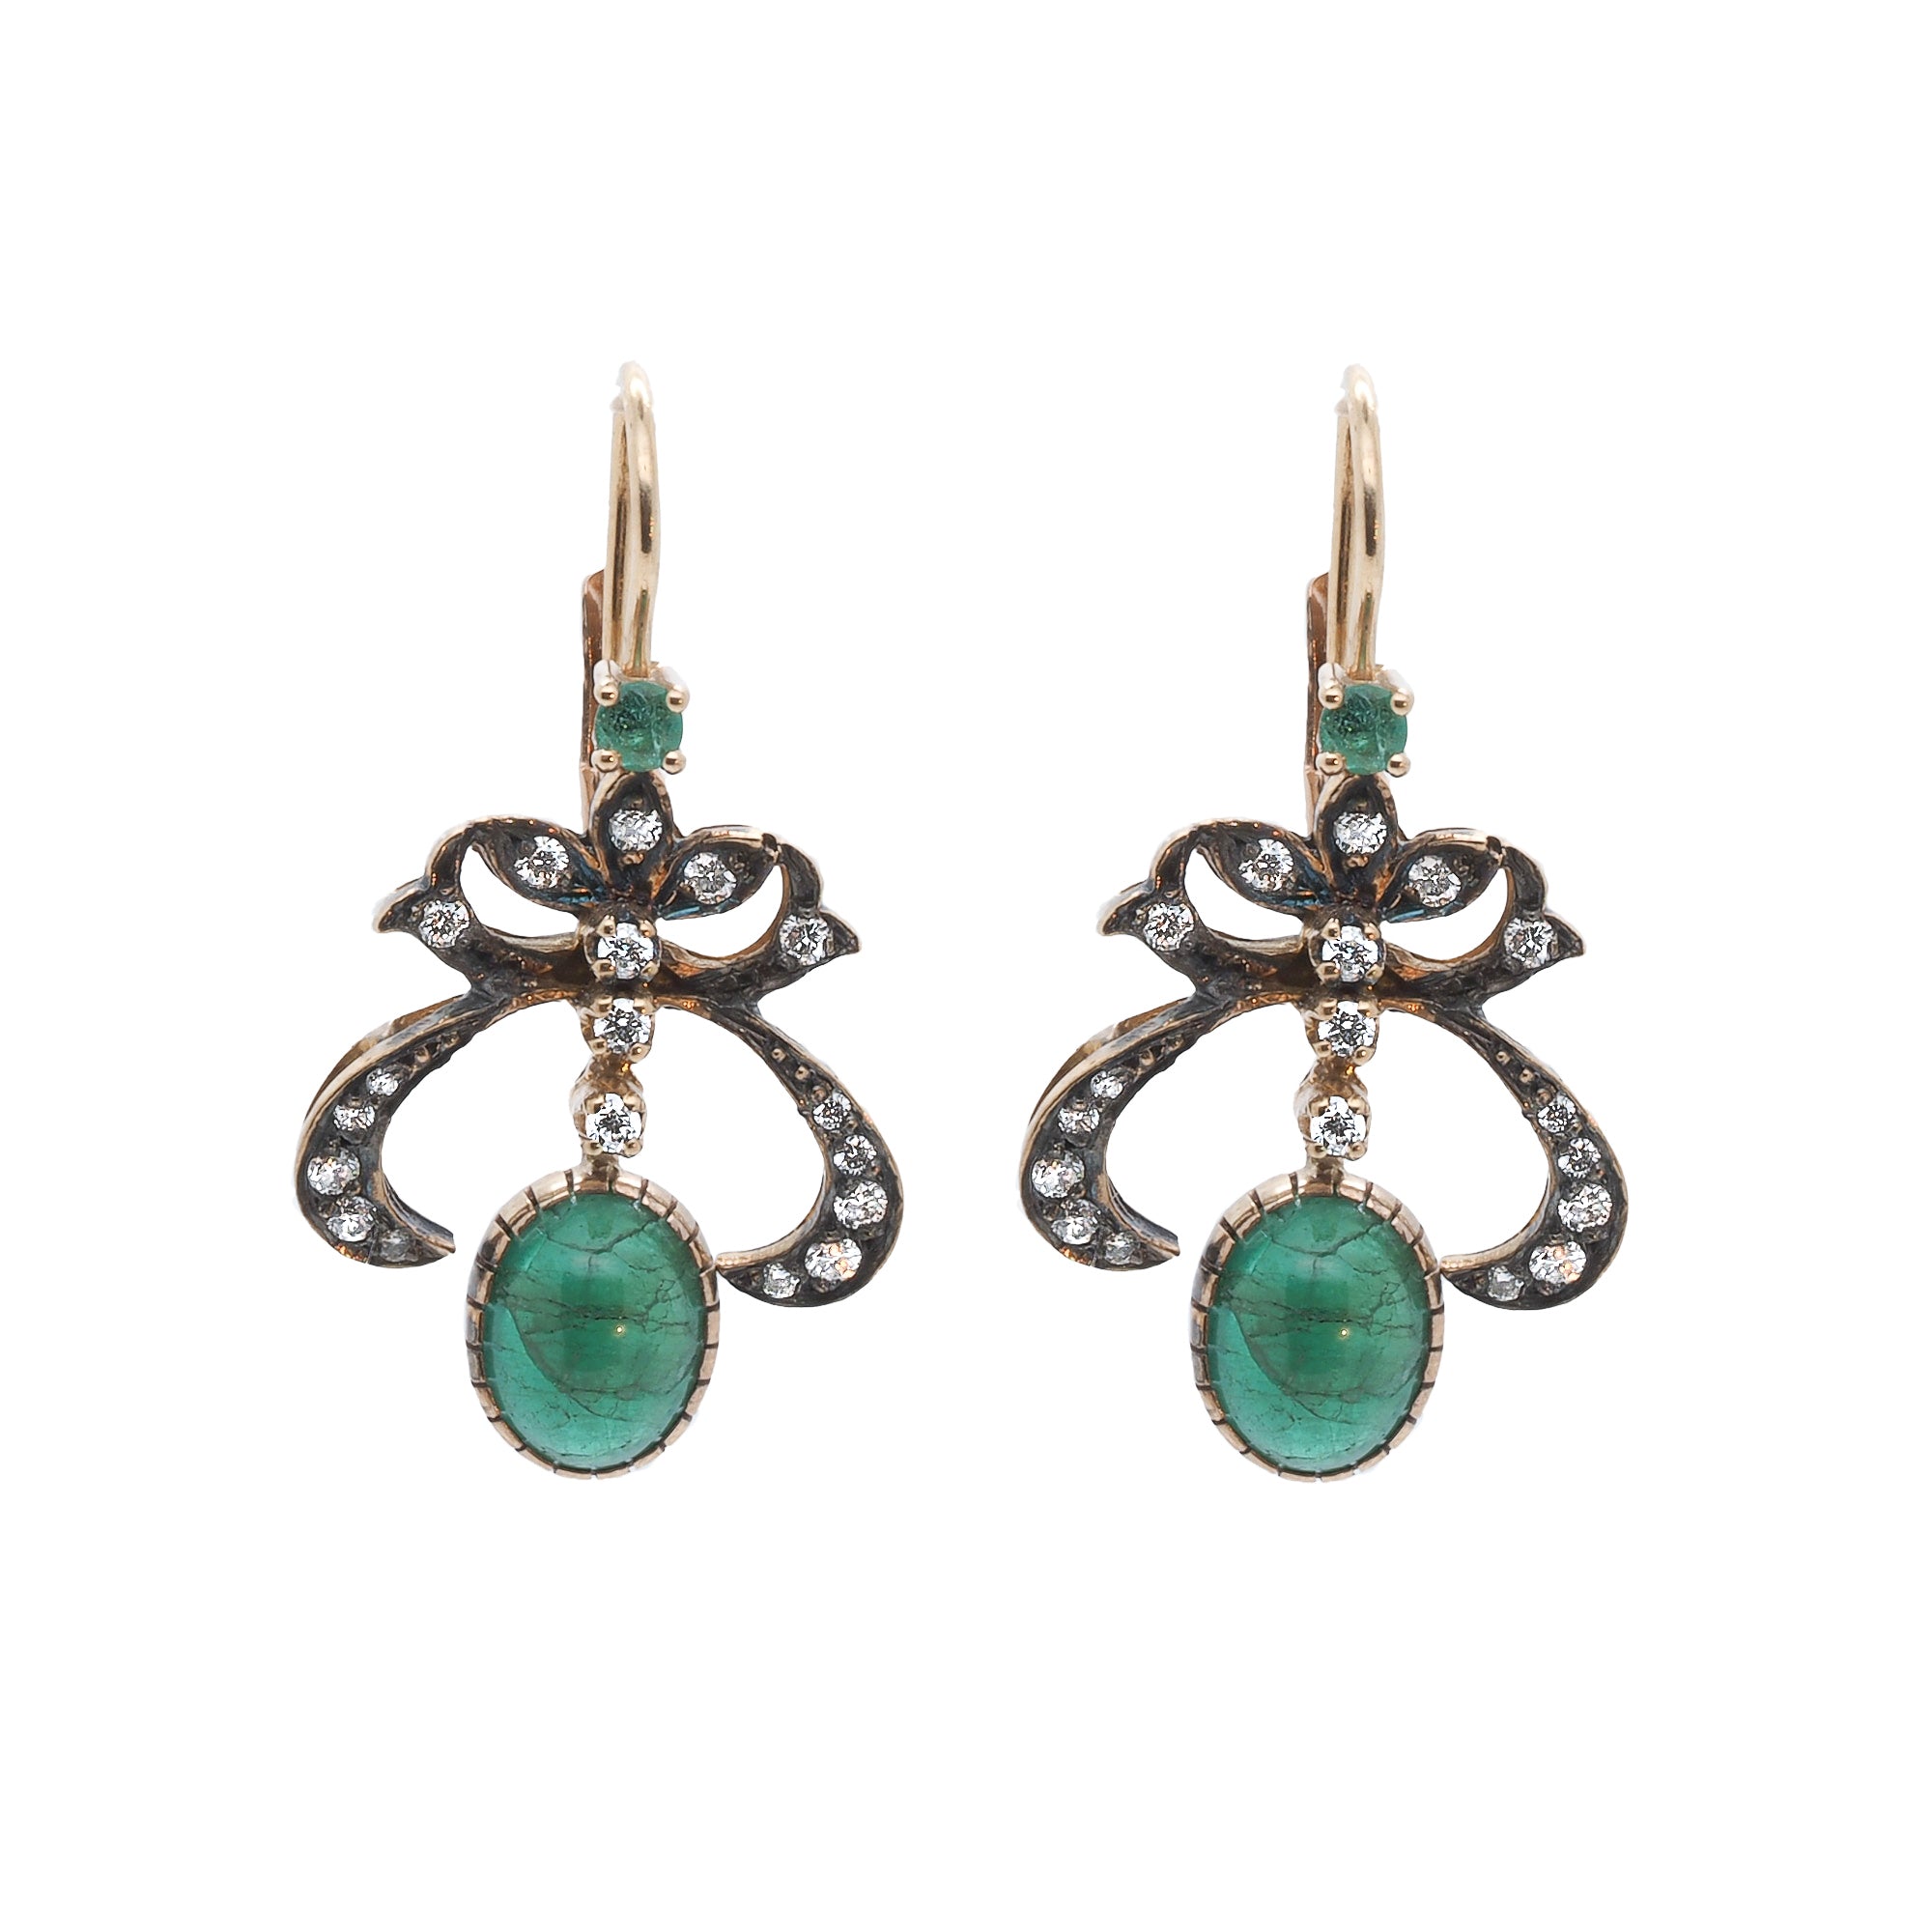 Cabochon Emerald Earrings shining brightly in the sunlight, showcasing their exquisite craftsmanship and natural beauty.